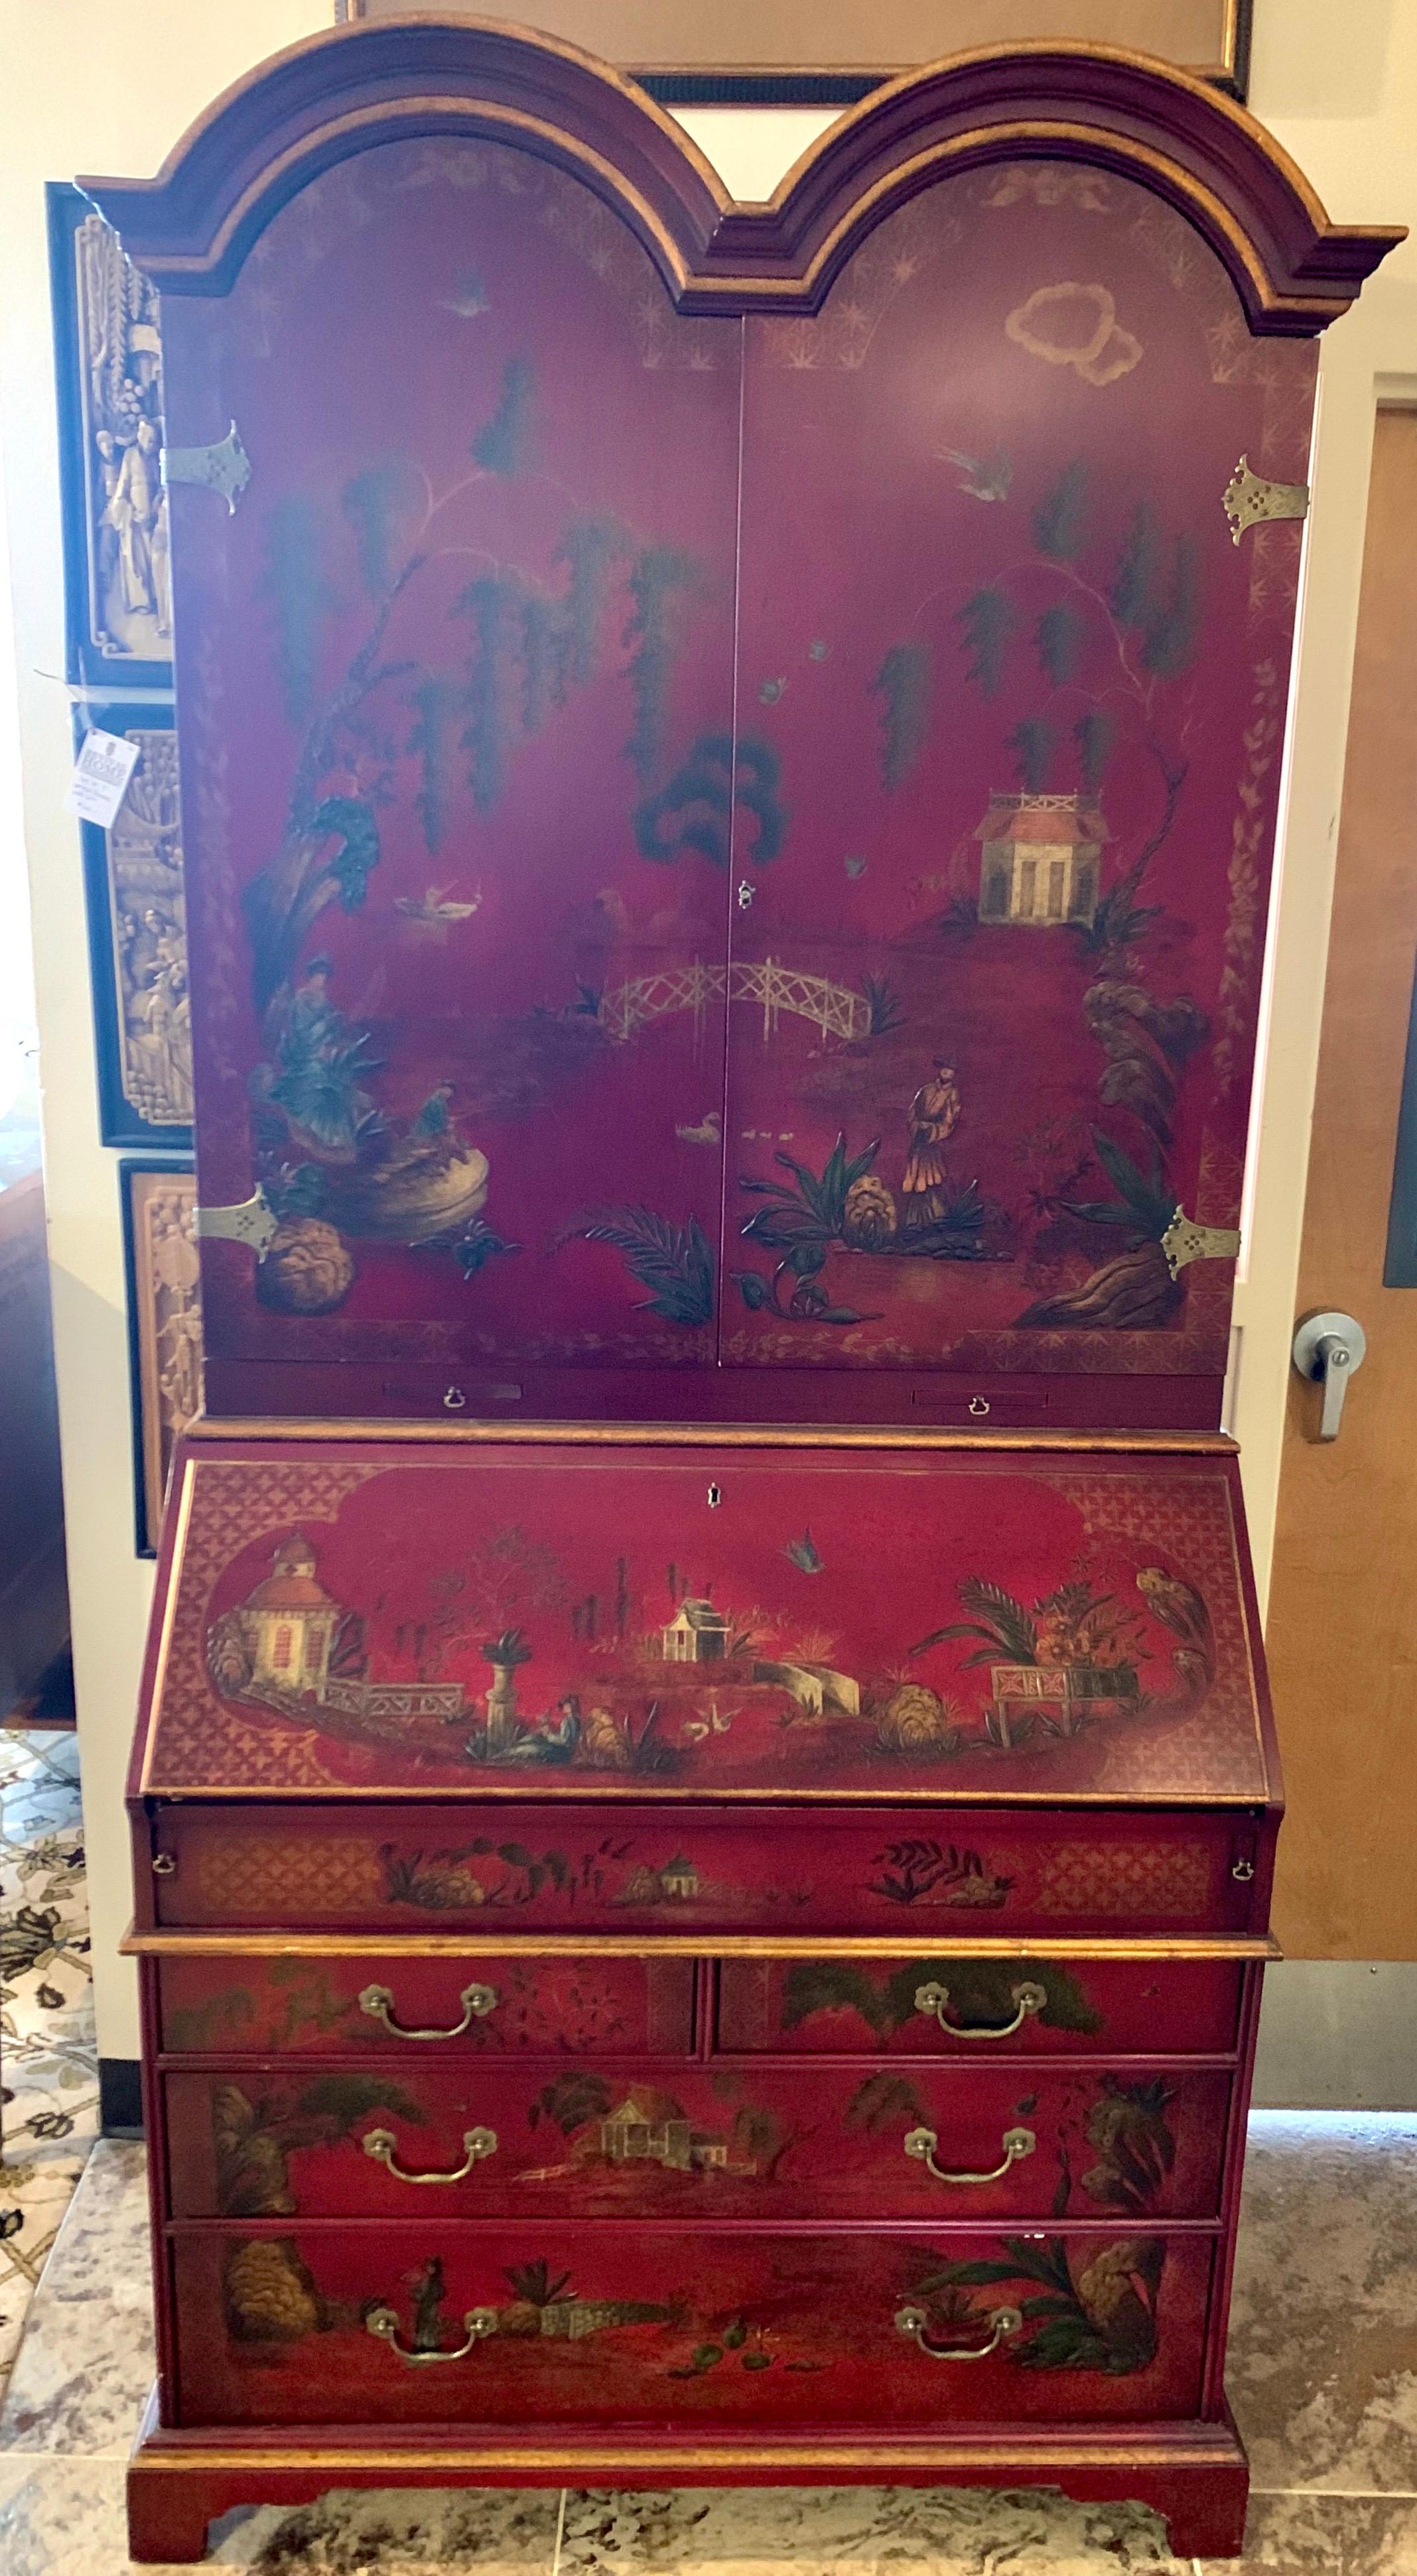 Rare signed John Widdicomb red chinoiserie midcentury secretary desk that comes in two pieces, a top and a bottom. It features multiple drawers and compartments, including a hidden storage compartment
that slides open and close. It also is fully